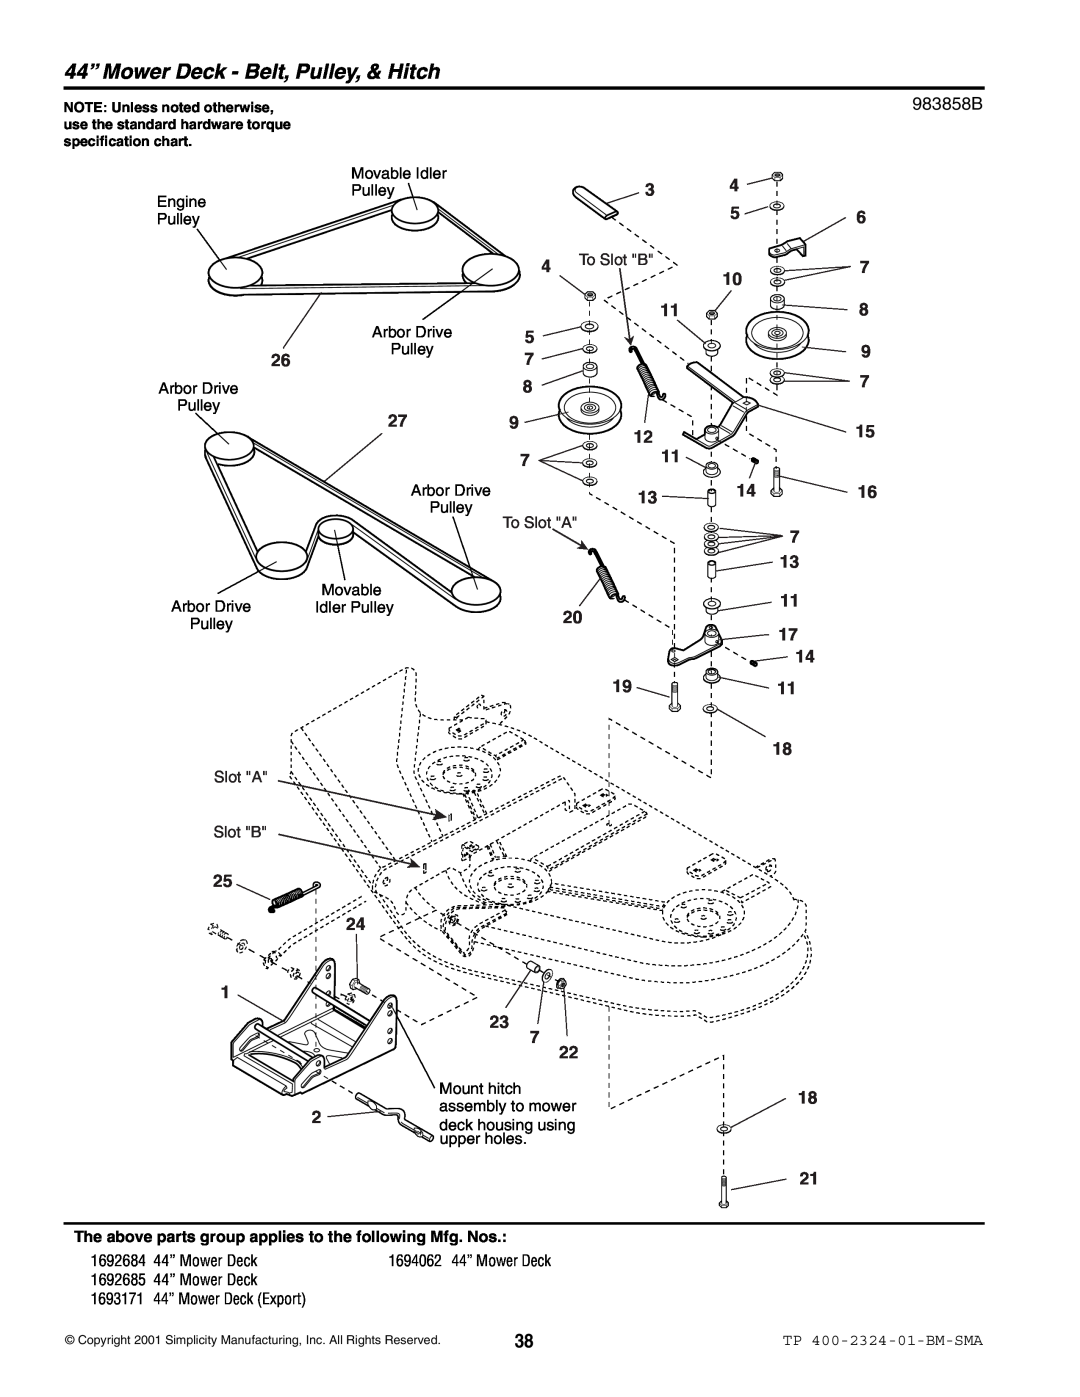 Simplicity 2600 44” Mower Deck - Belt, Pulley, & Hitch, To Slot B, To Slot A, Mount hitch, assembly to mower, upper holes 